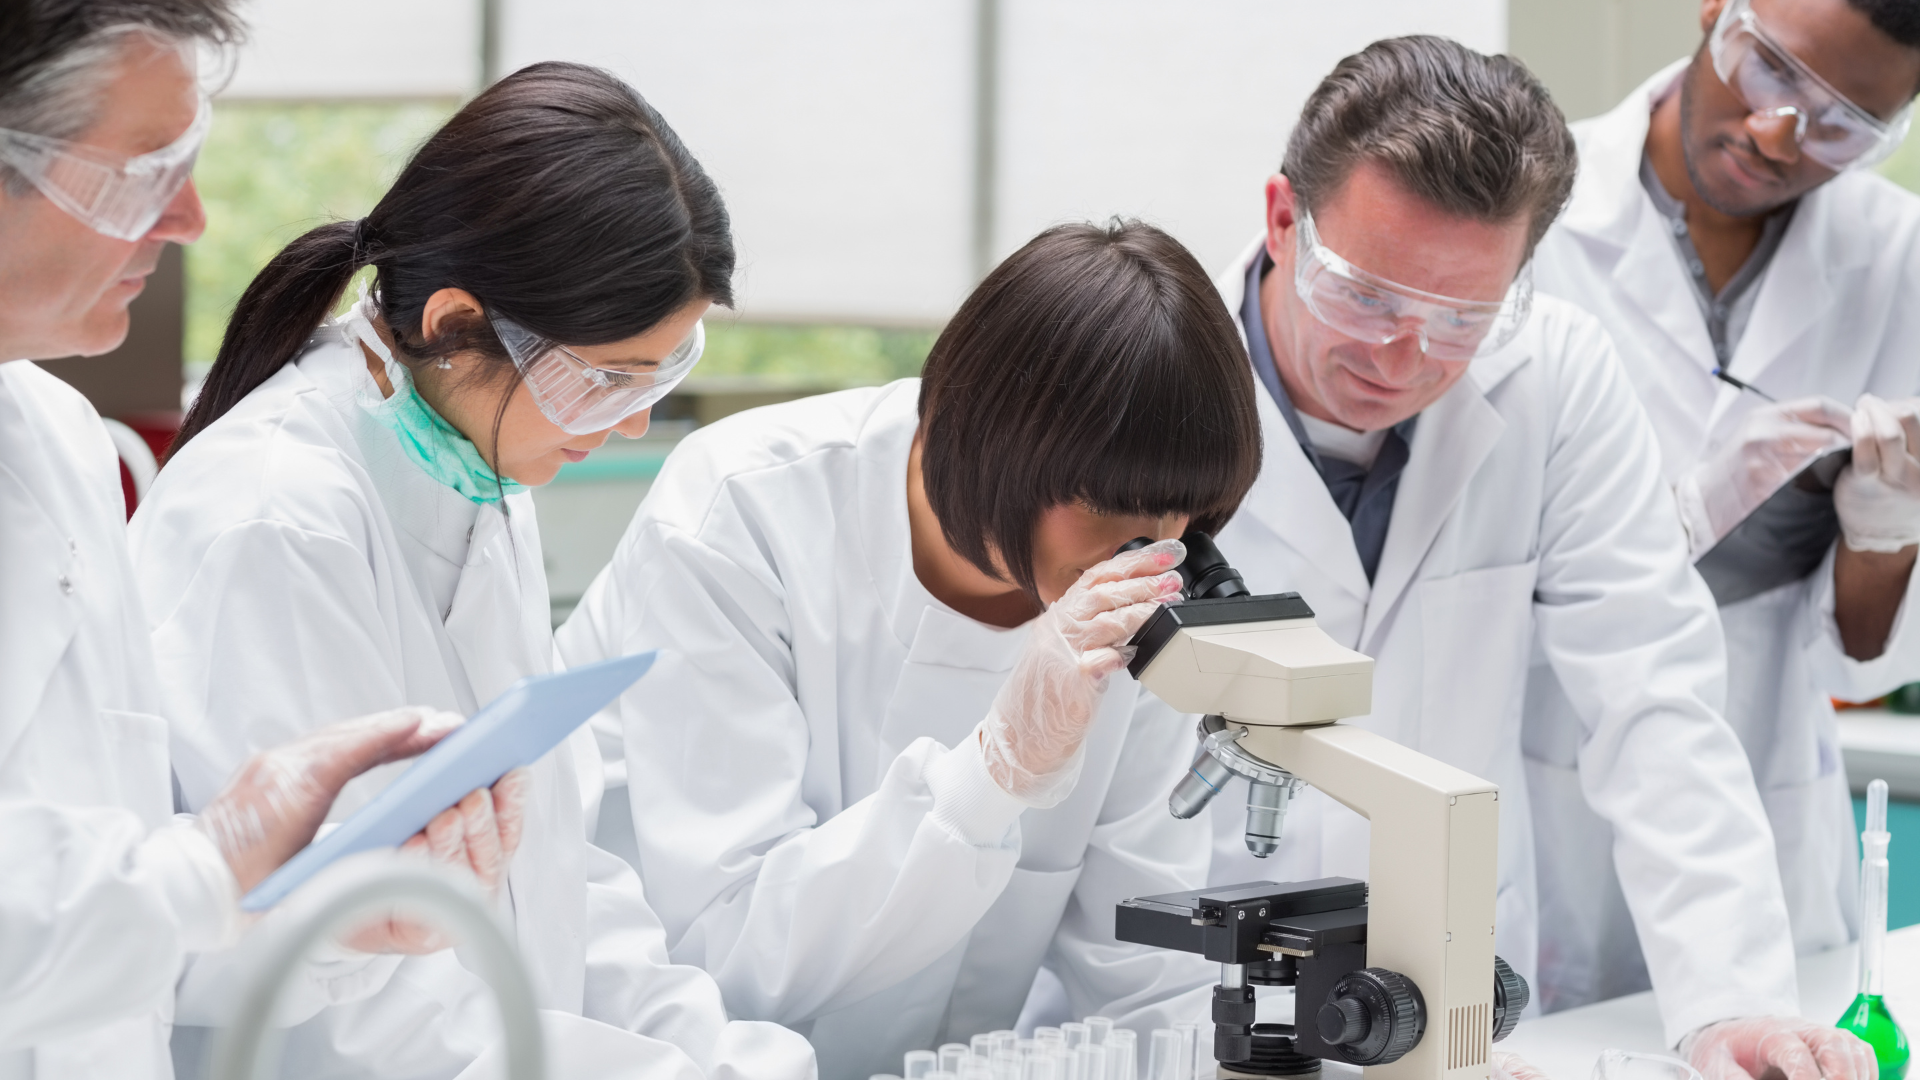 An image of some lab technicians working together on a project.